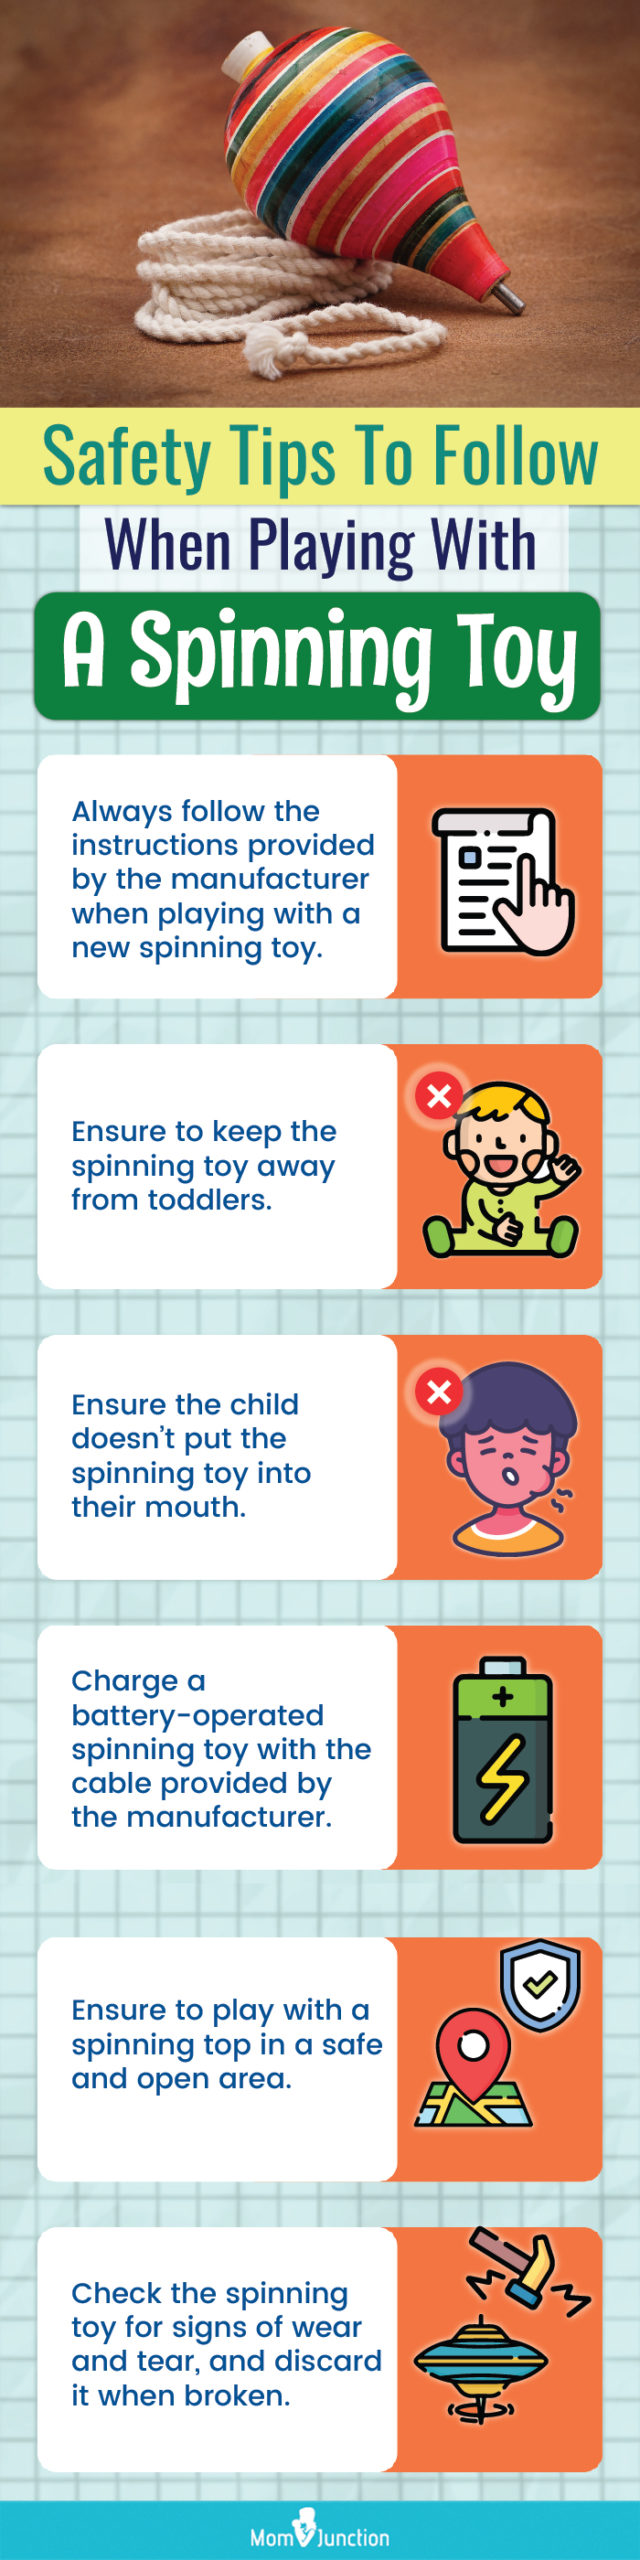 Safety Tips To Follow When Playing With A Spinning Toy (infographic)